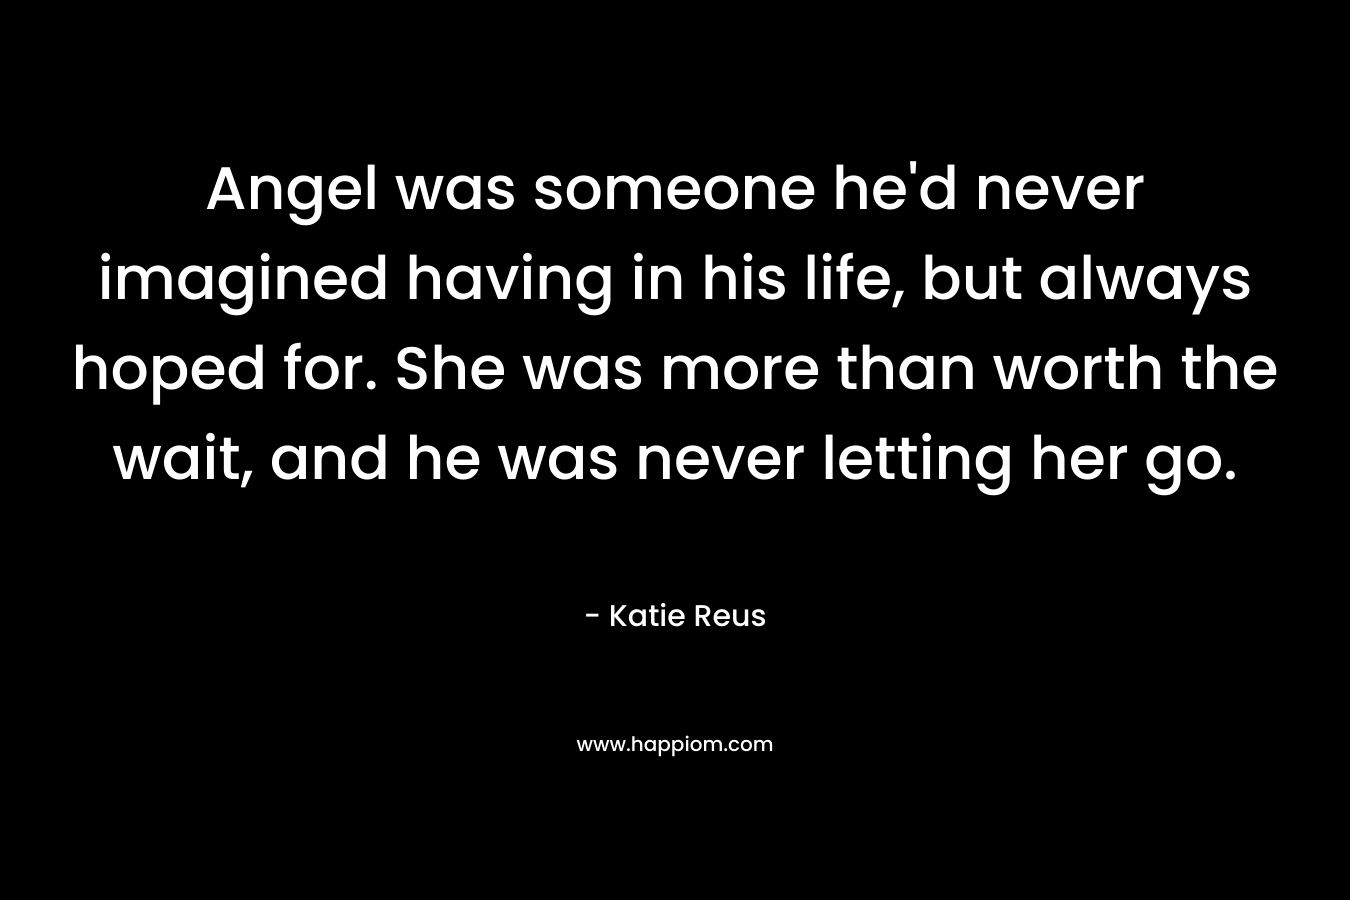 Angel was someone he’d never imagined having in his life, but always hoped for. She was more than worth the wait, and he was never letting her go. – Katie Reus